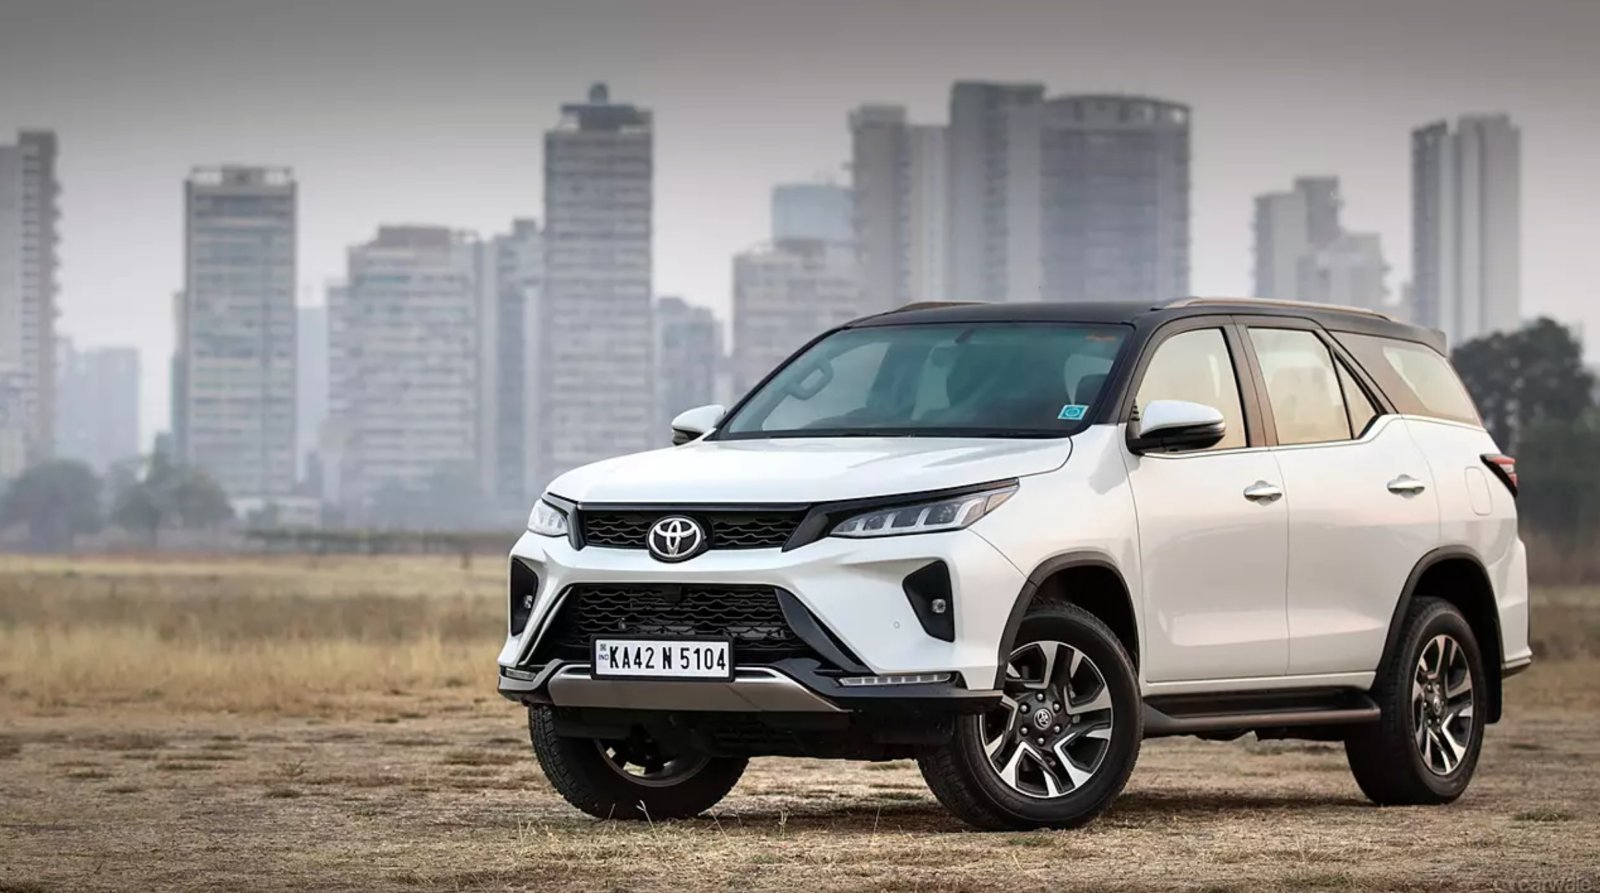 You will have to wait so much after buying Toyota Fortuner, know information related to waiting period here